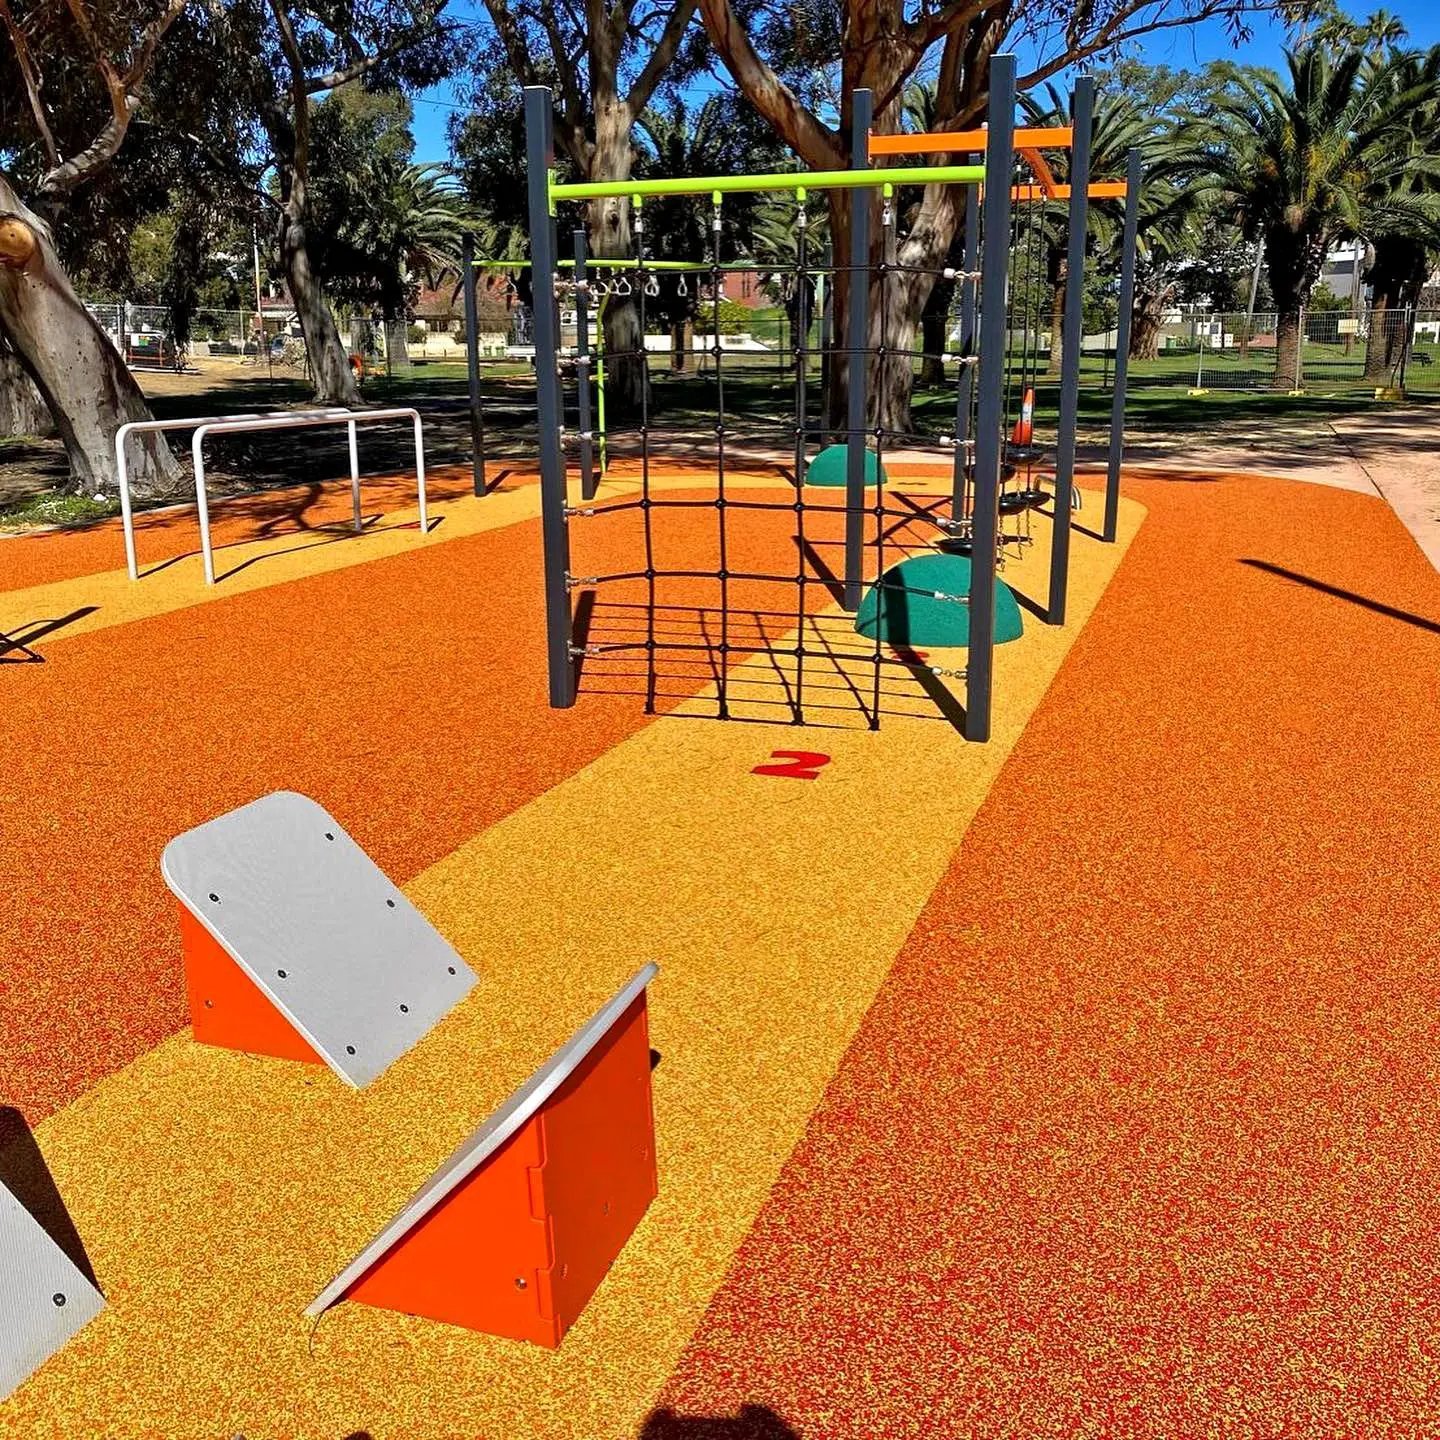 outdoor ninja gym uses colored rubber granules to create bright rubber flooring